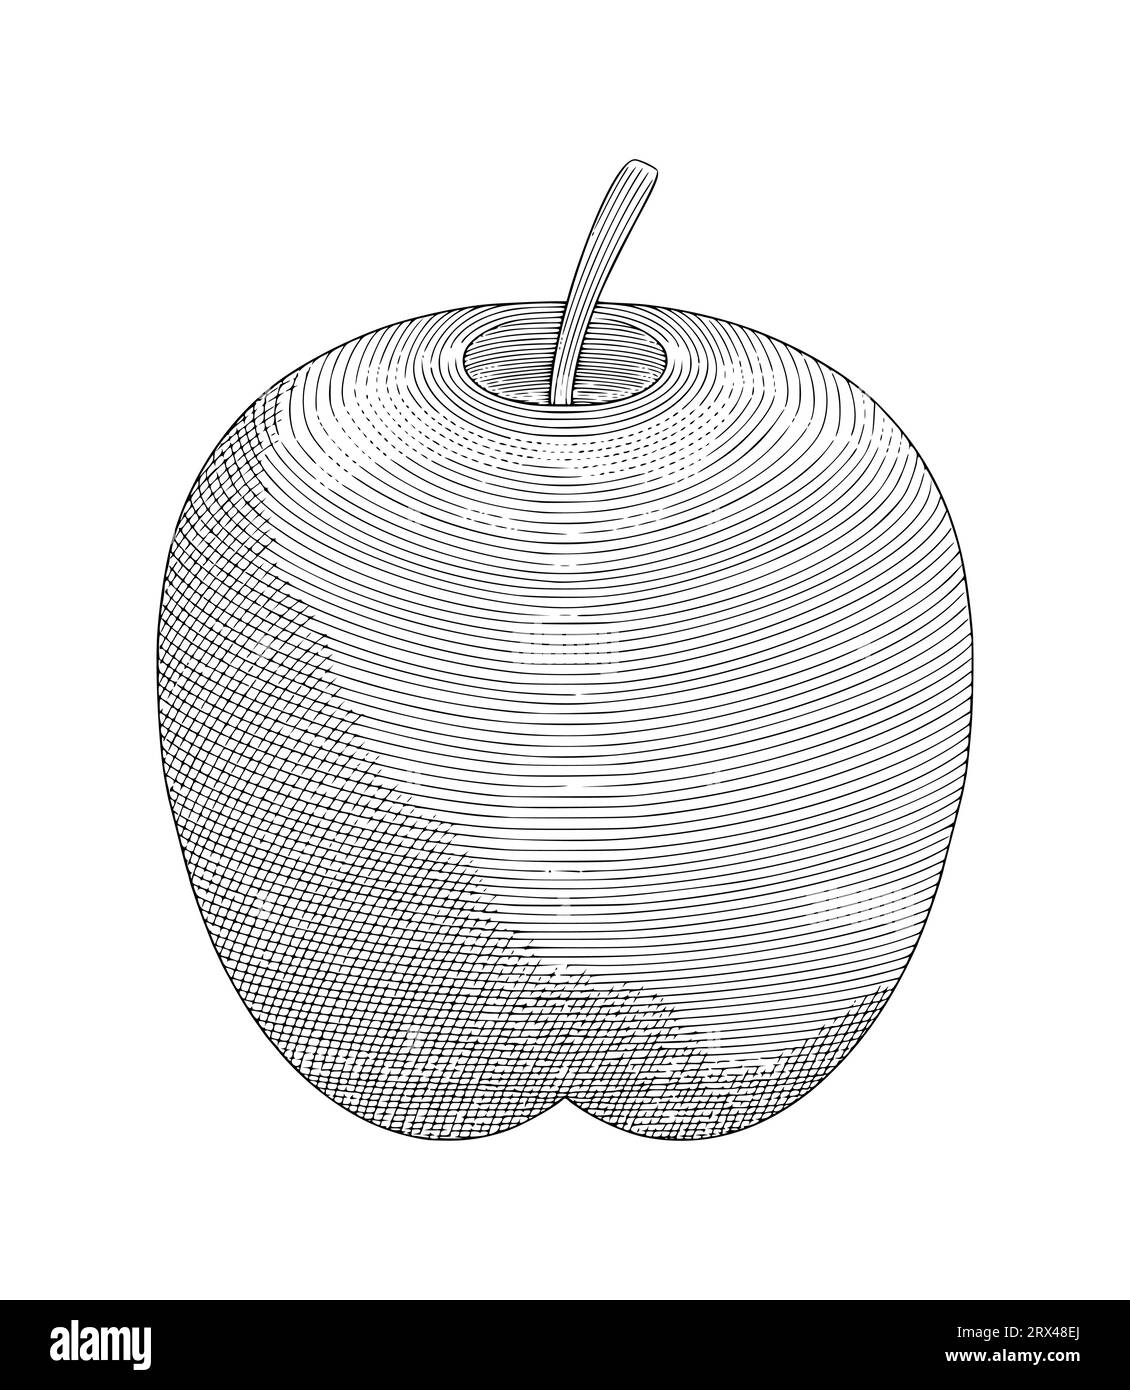 apple in vintage engraving drawing style vector illustration Stock Vector